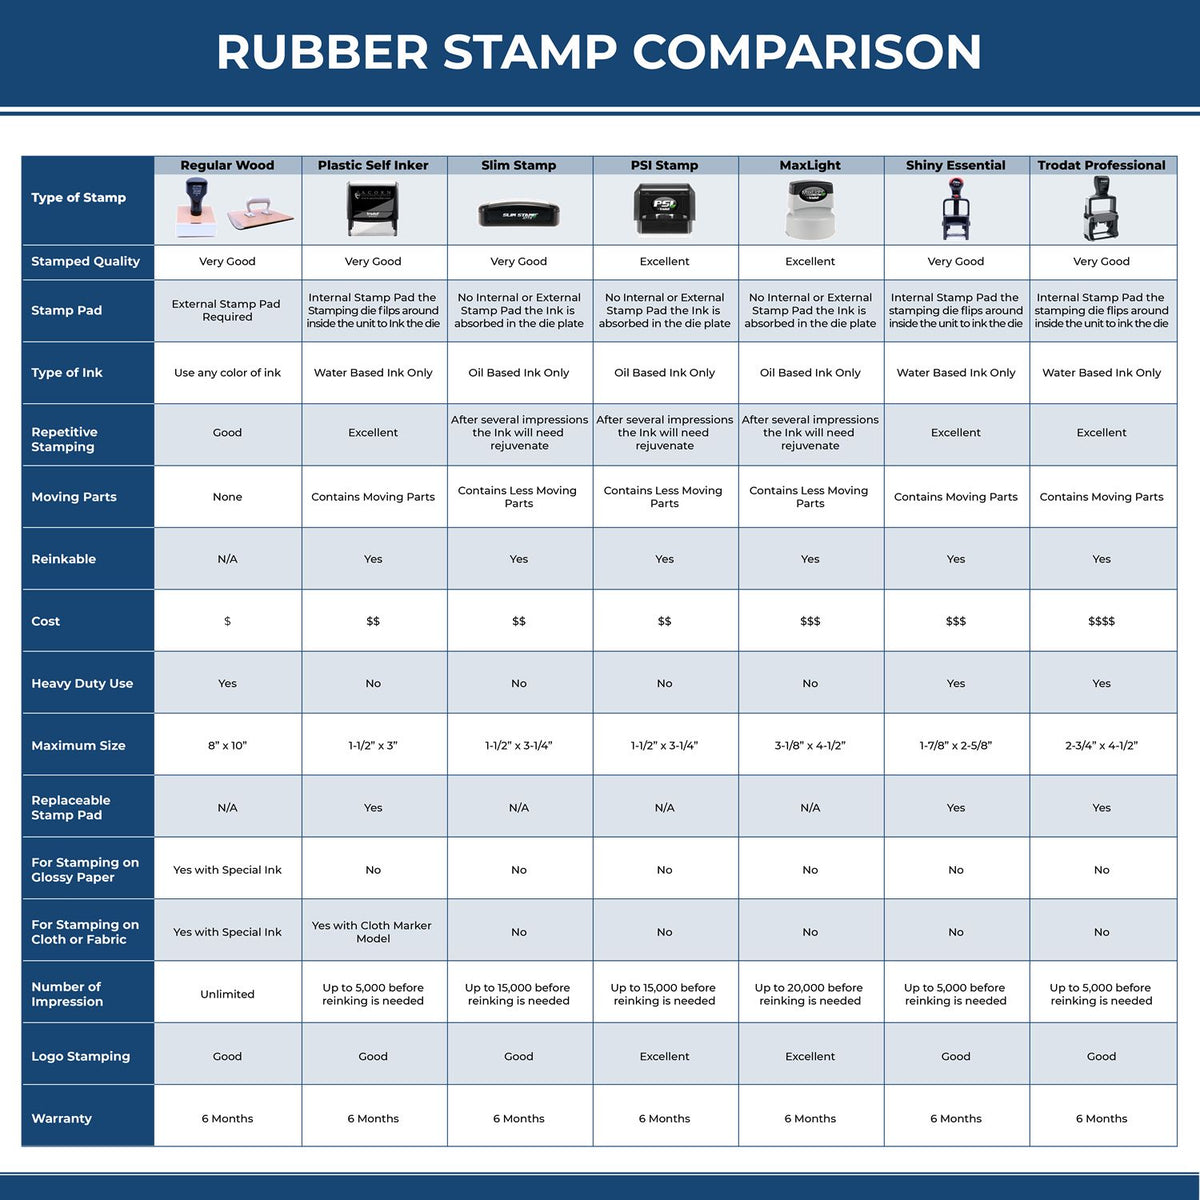 Large Late Rubber Stamp 4676R Rubber Stamp Comparison